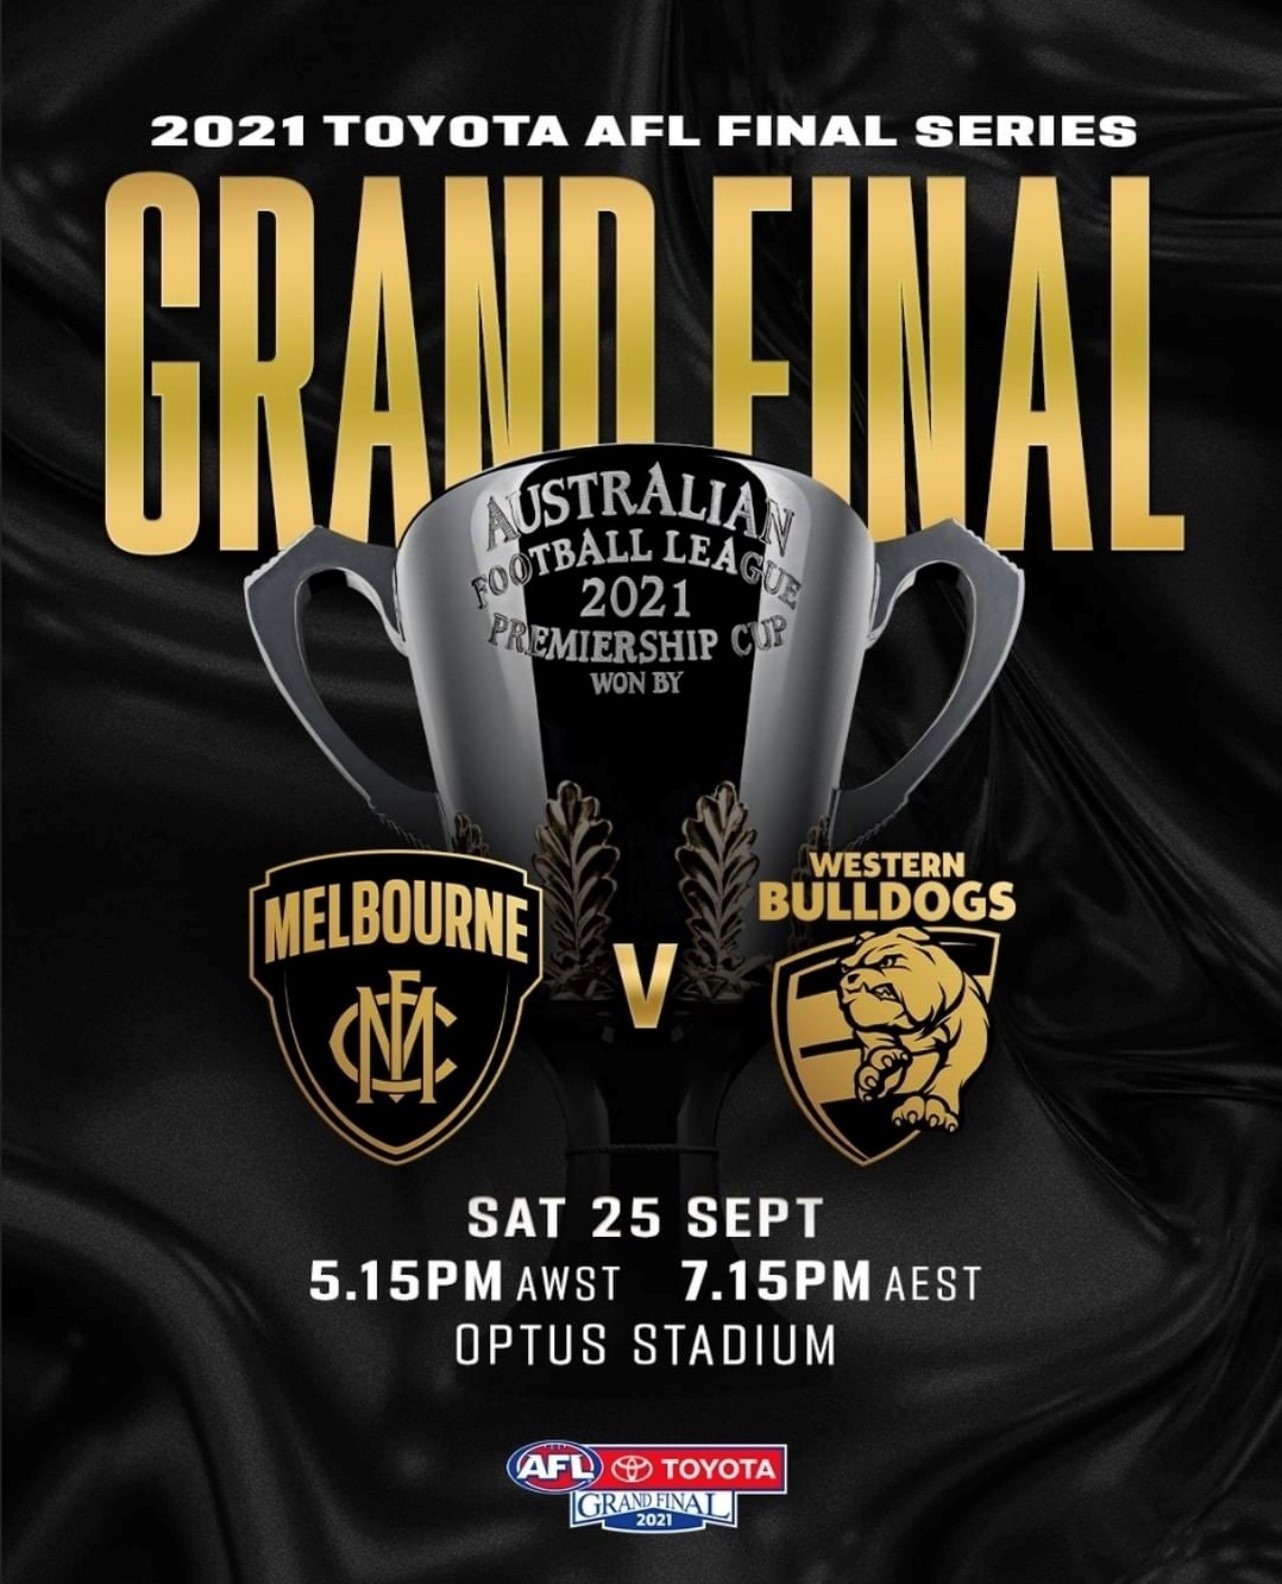 AFL Grand Final - pre and post match entertainment [Perth]